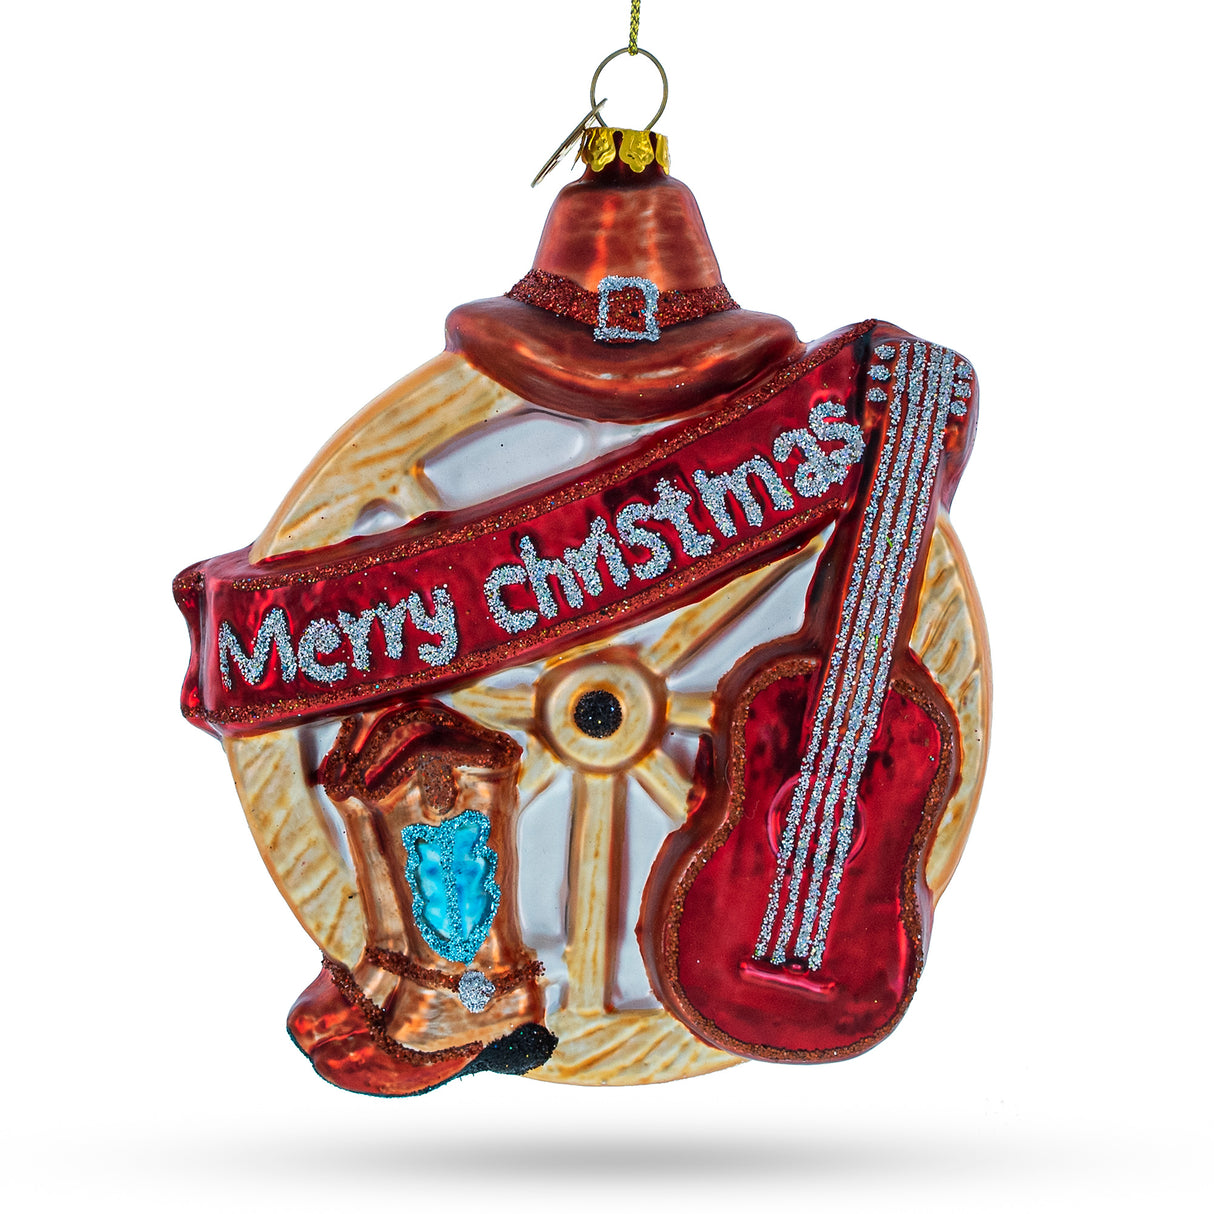 Western Ensemble with Guitar, Cowboy Boots, Hat, and Wheel - Festive Blown Glass Christmas Ornament in Red color,  shape